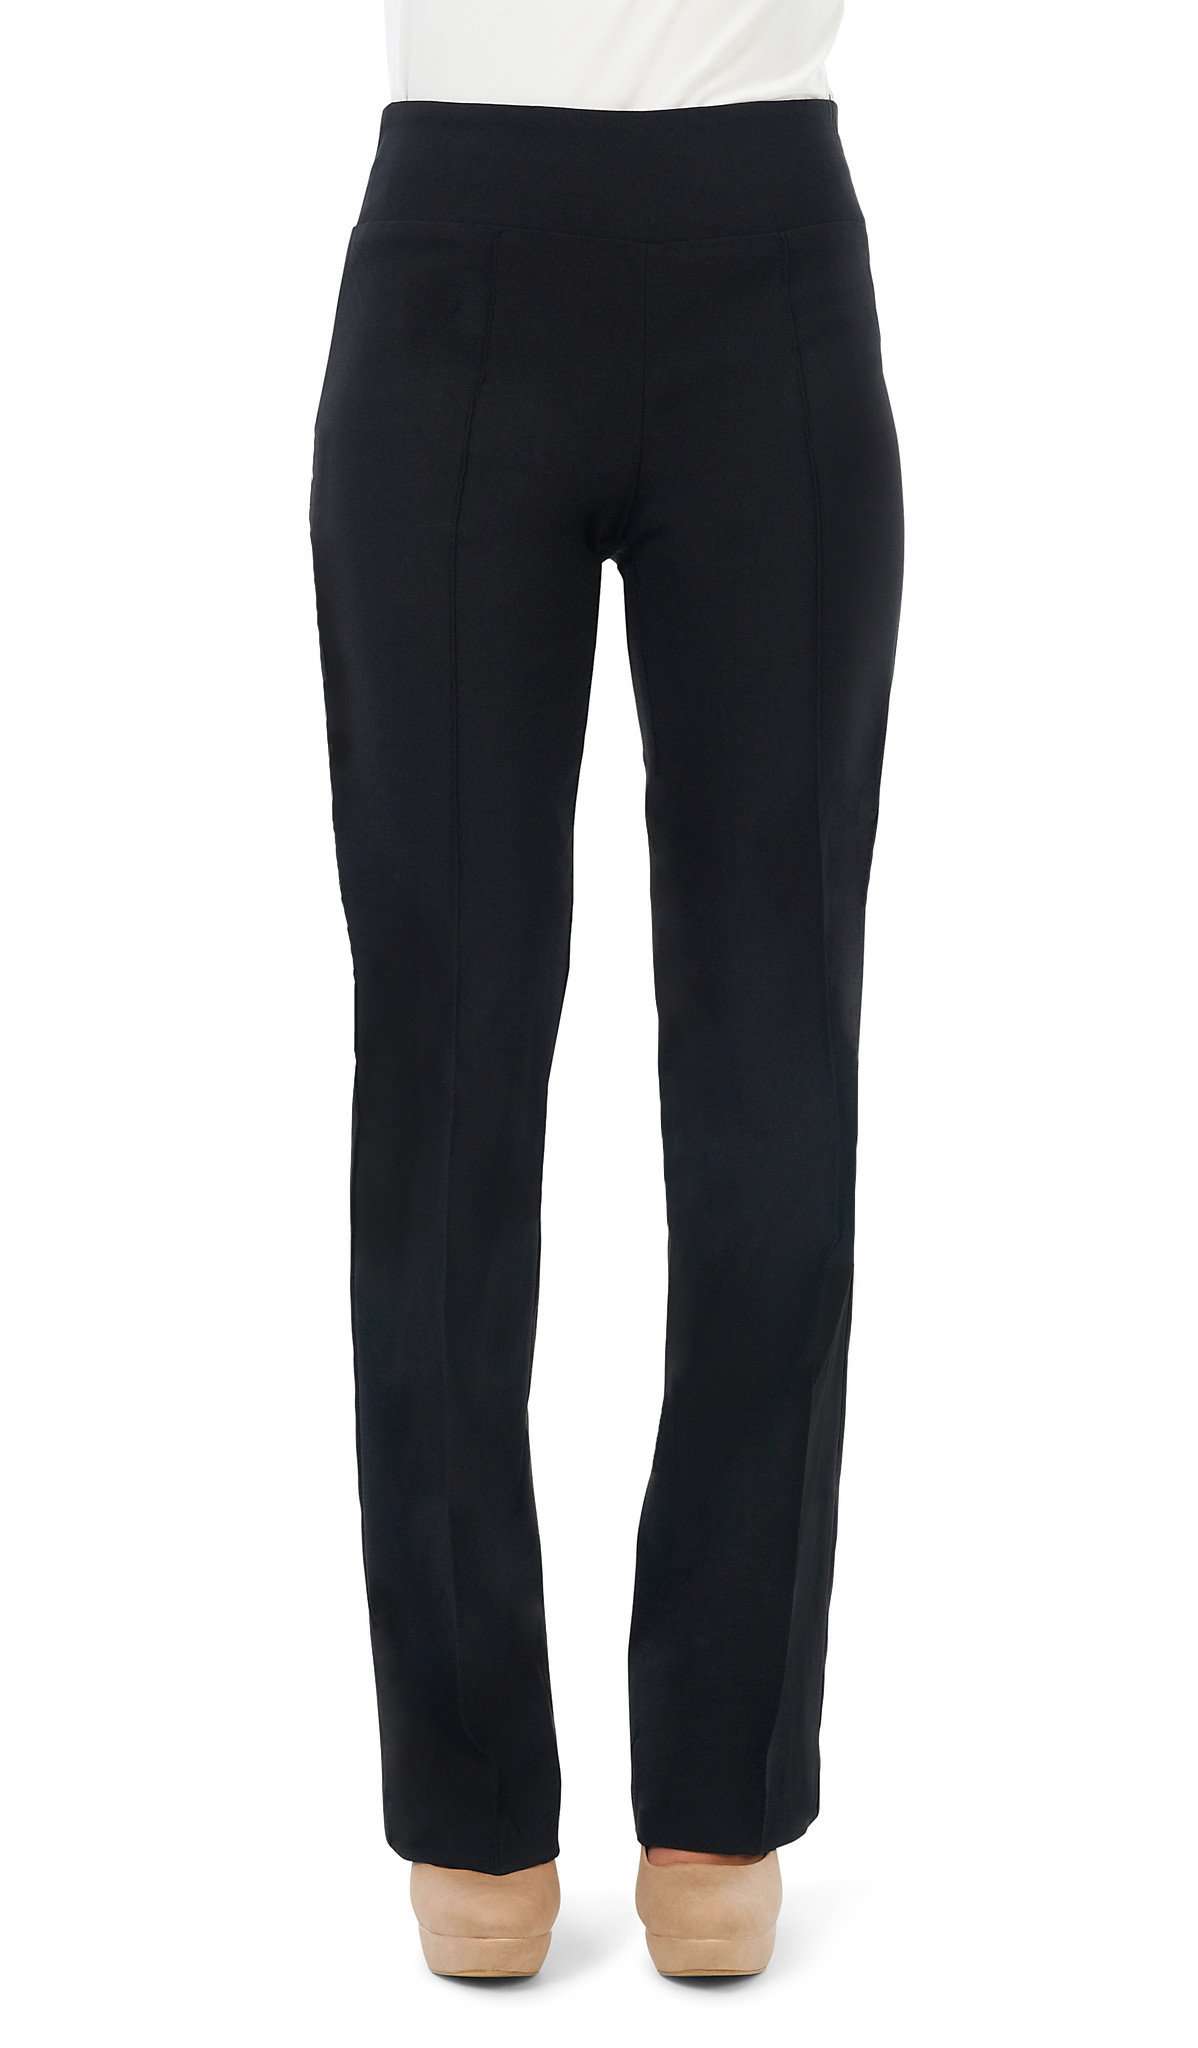 Women's Pants Black Ultimate Comfort Fit "Our Miracle Pant " Features Quality Stretch Fabric Wash after Wash Amazing Quality Made in Canada Yvonne Marie Exclusive Design - Yvonne Marie - Yvonne Marie